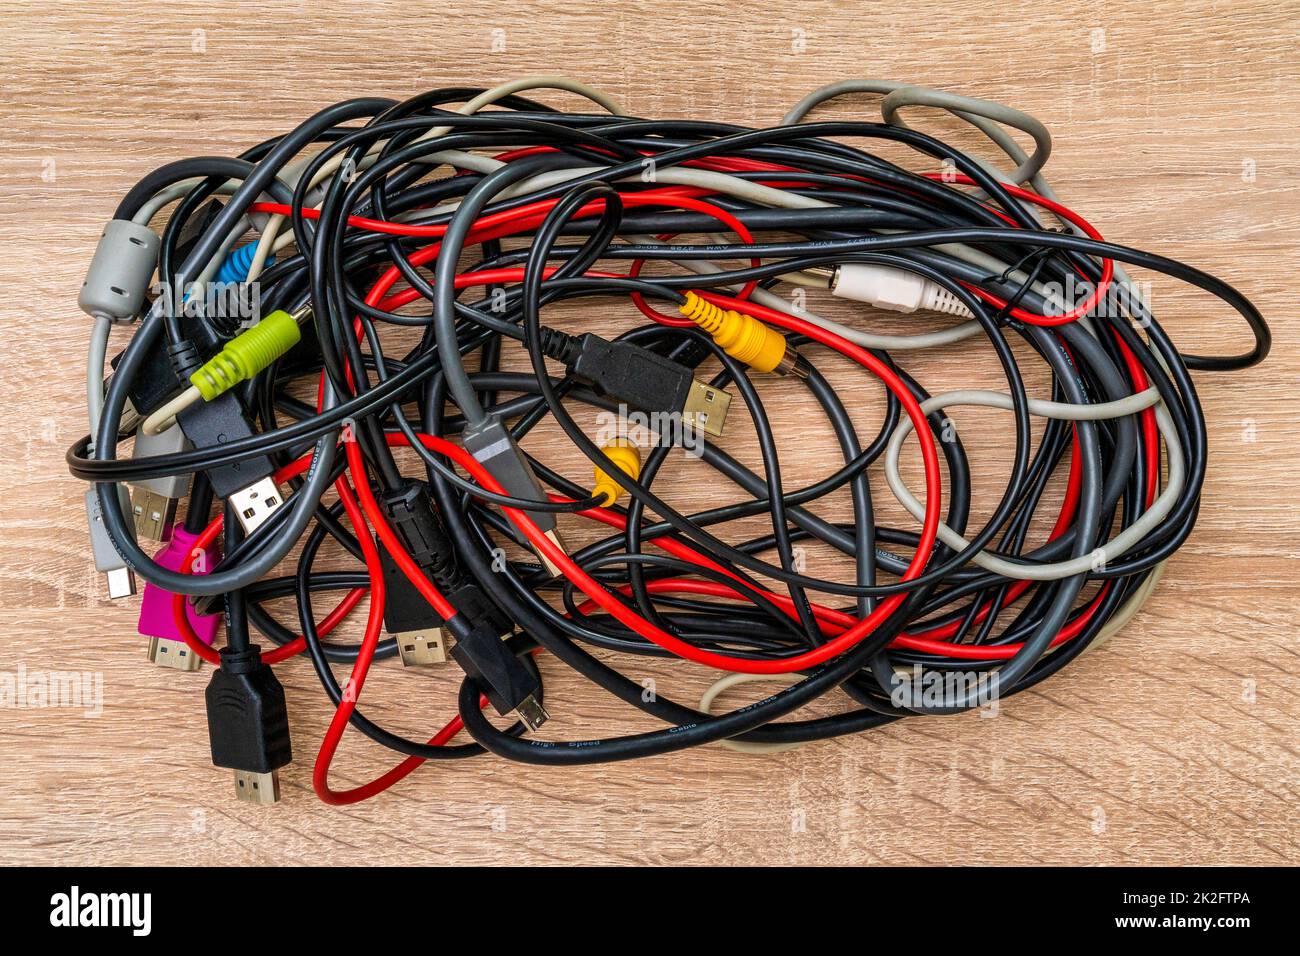 Bundle of various cables Stock Photo